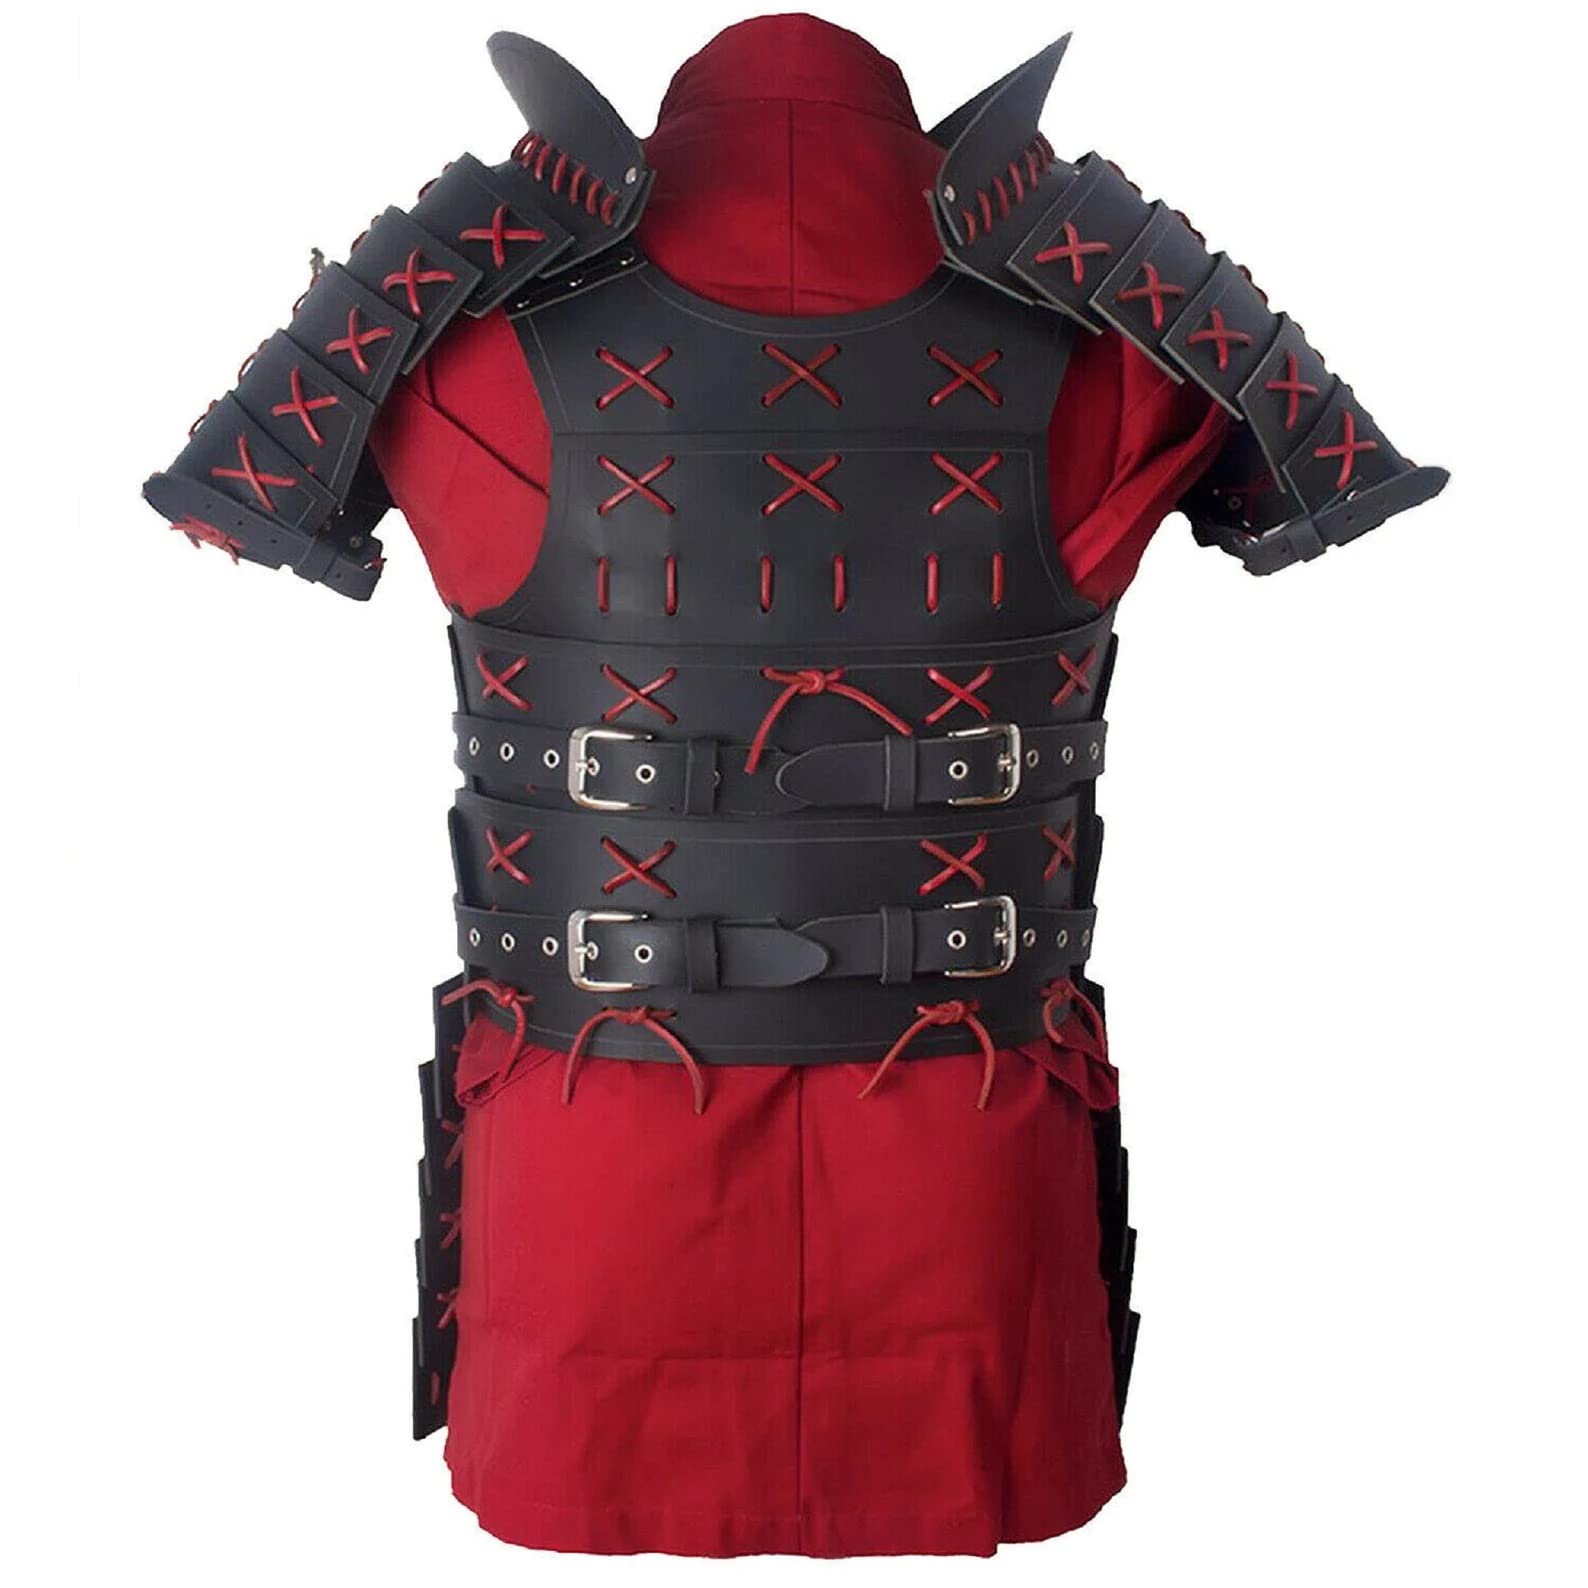 Medieval leather Samurai Armor - Leather Armor for LARP and Cosplay